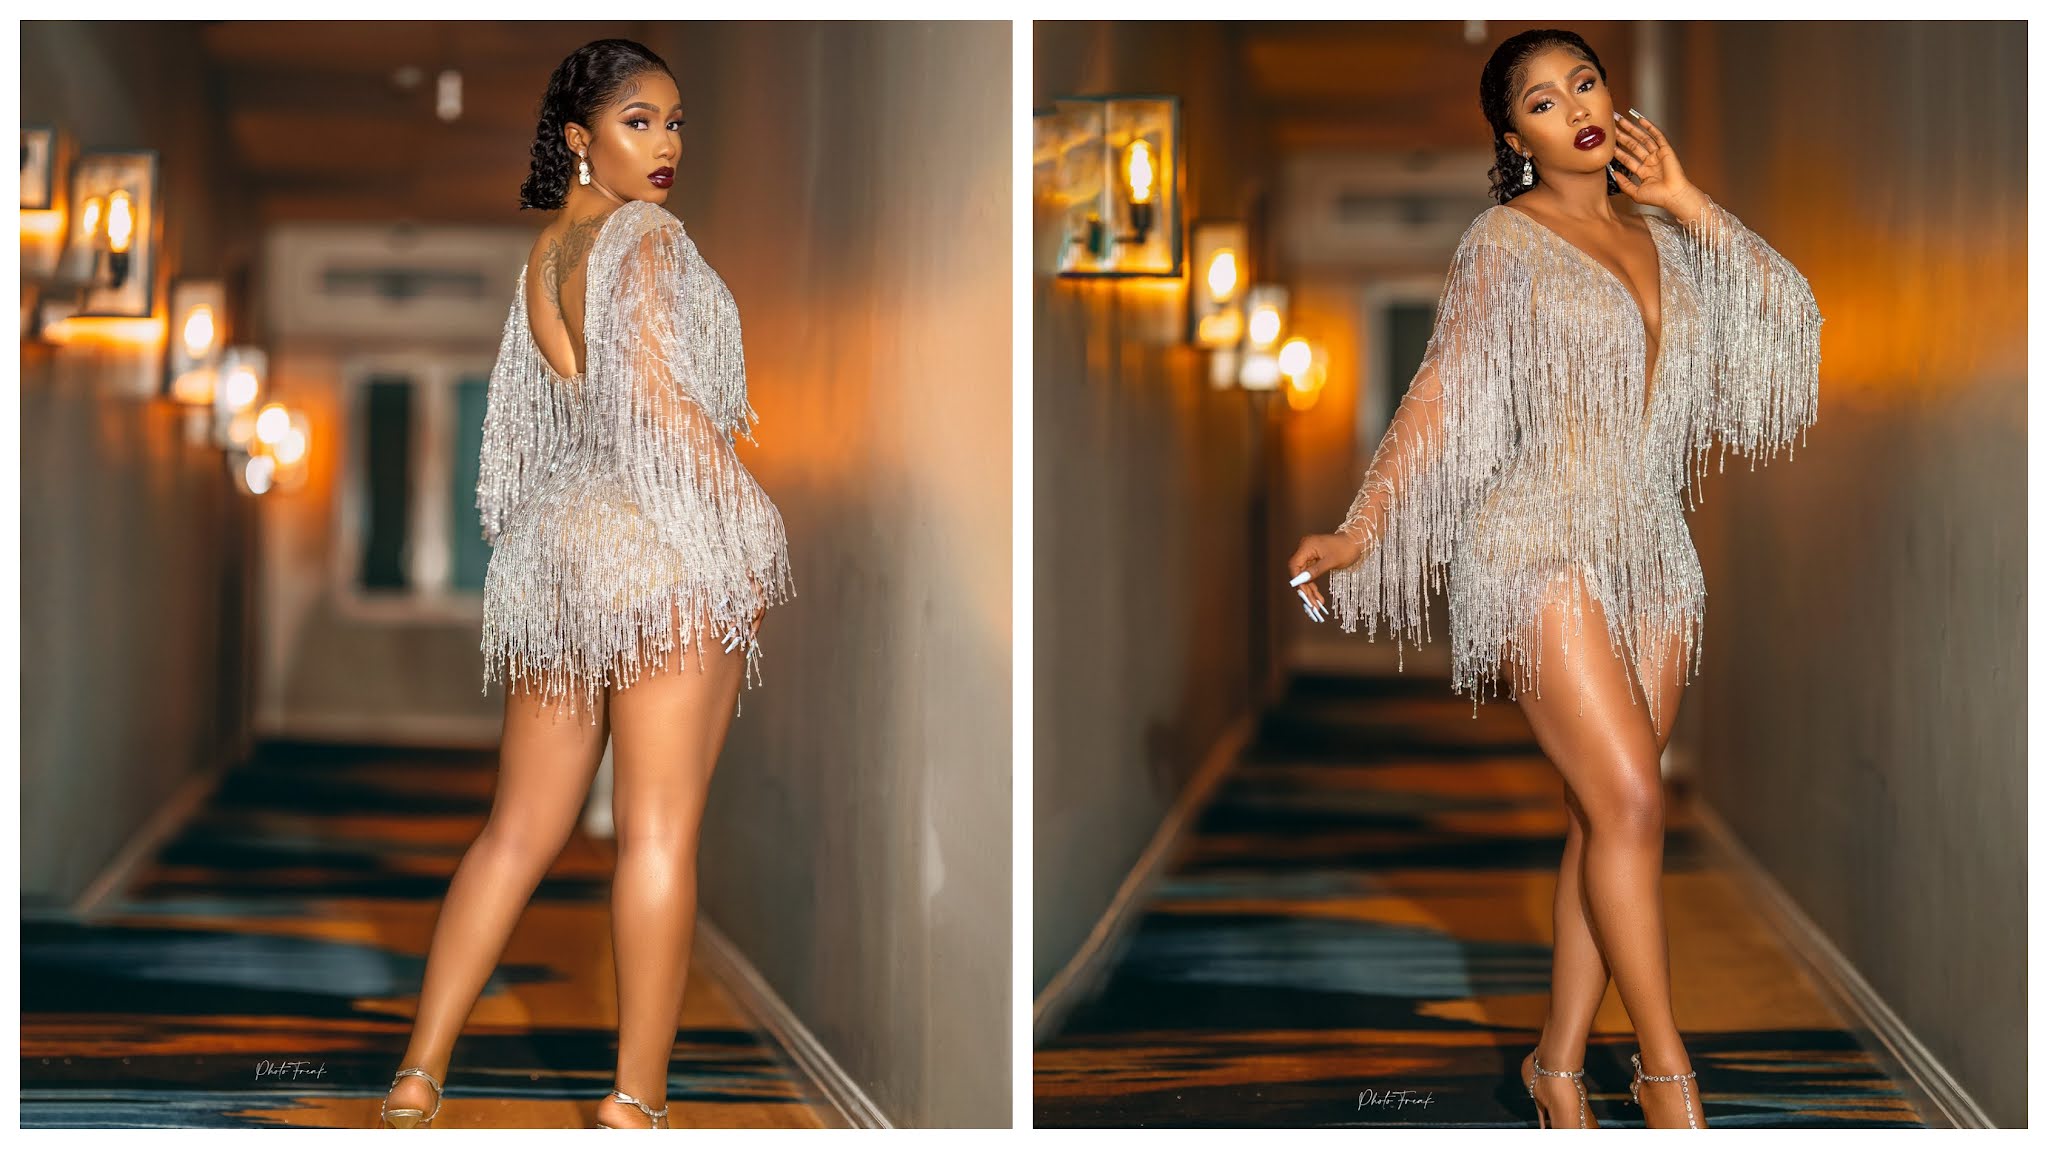 BBNaija: Mercy Eke steps out in gorgeous outfit, says "I feel so blessed having amazing people in my conner"